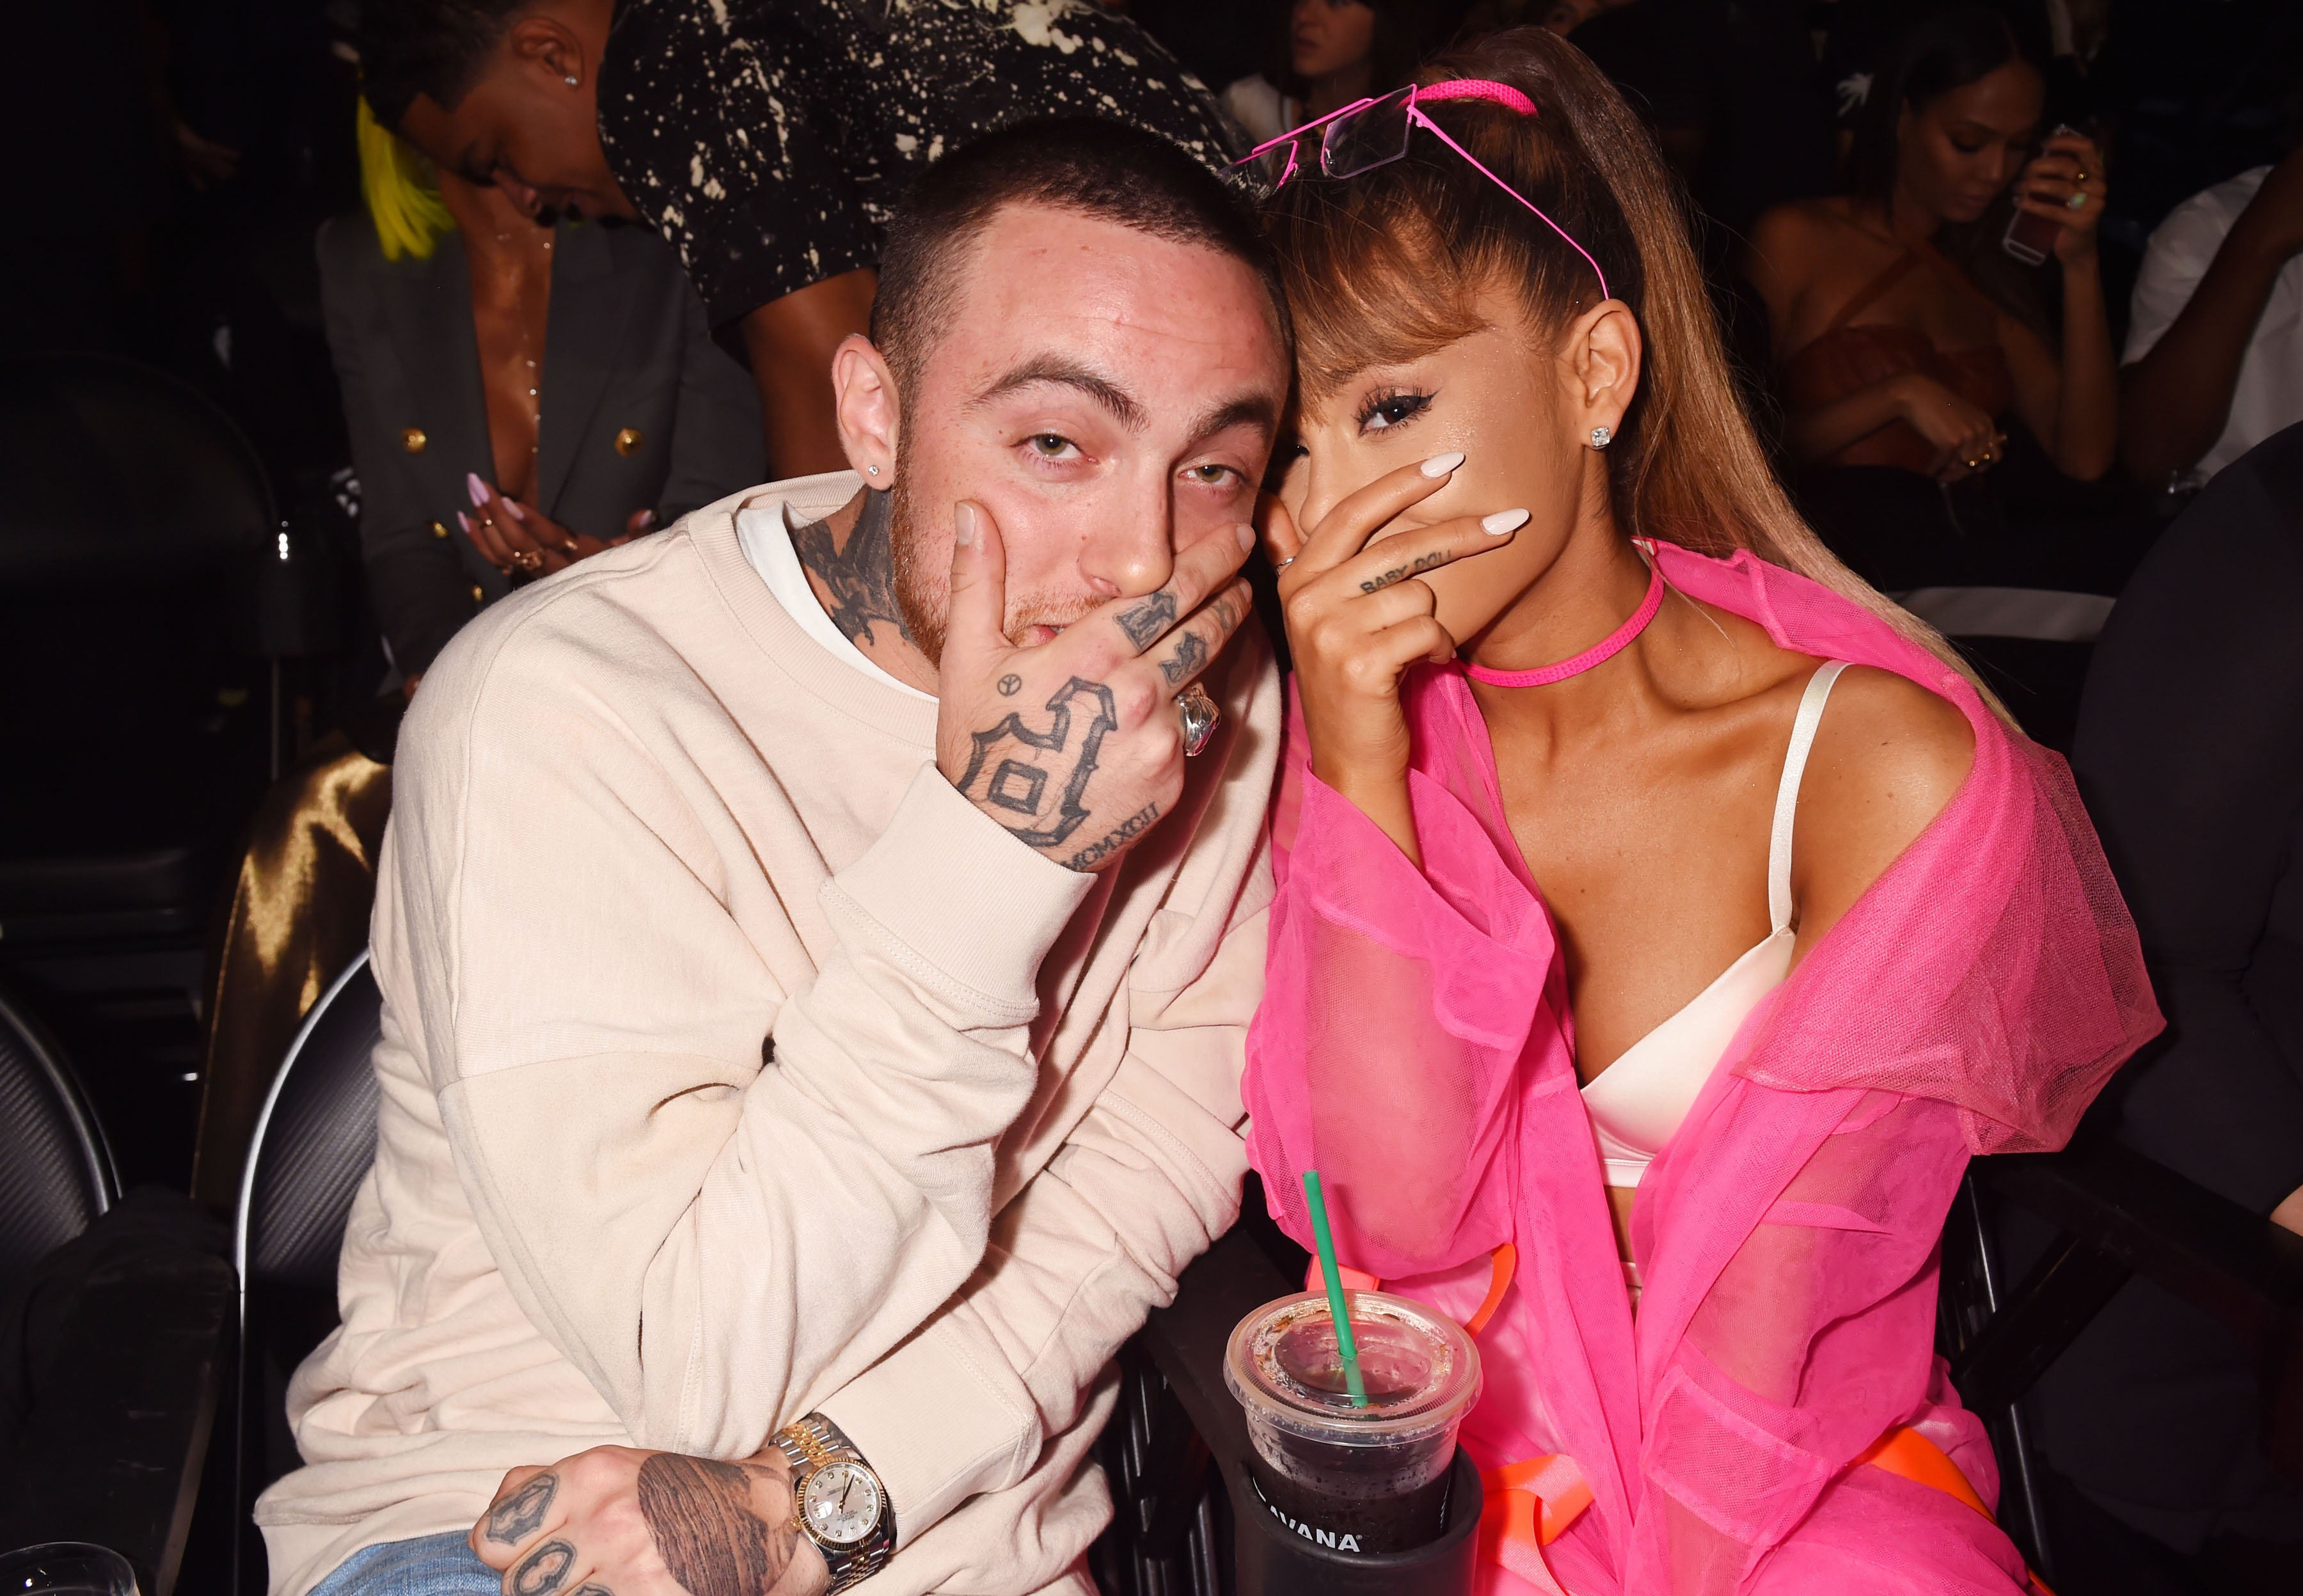 Mac Miller and Ariana Grande pose backstage during the 2016 MTV Video Music Awards on August 28, 2016 in New York City.